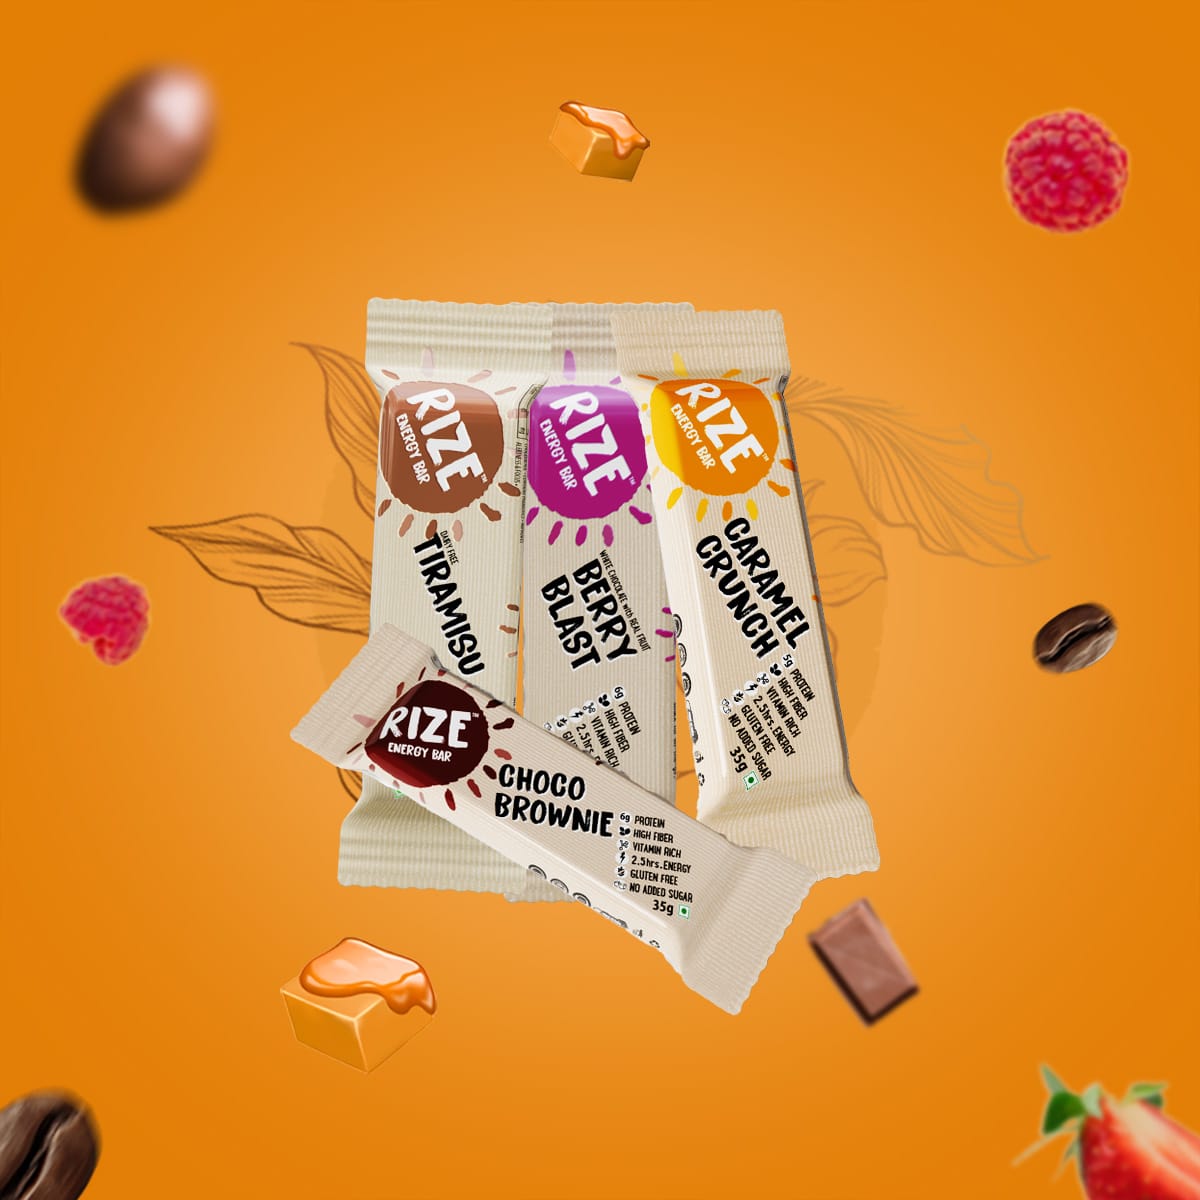 #bustingmyths
Myth: Energy bars containing Taurine and Caffeine can lead to crashes. 

Fun Fact:  Rize Energy Bars are designed with a balanced blend of ingredients to provide sustained energy with nutrients to support focus and alertness.
#rizers